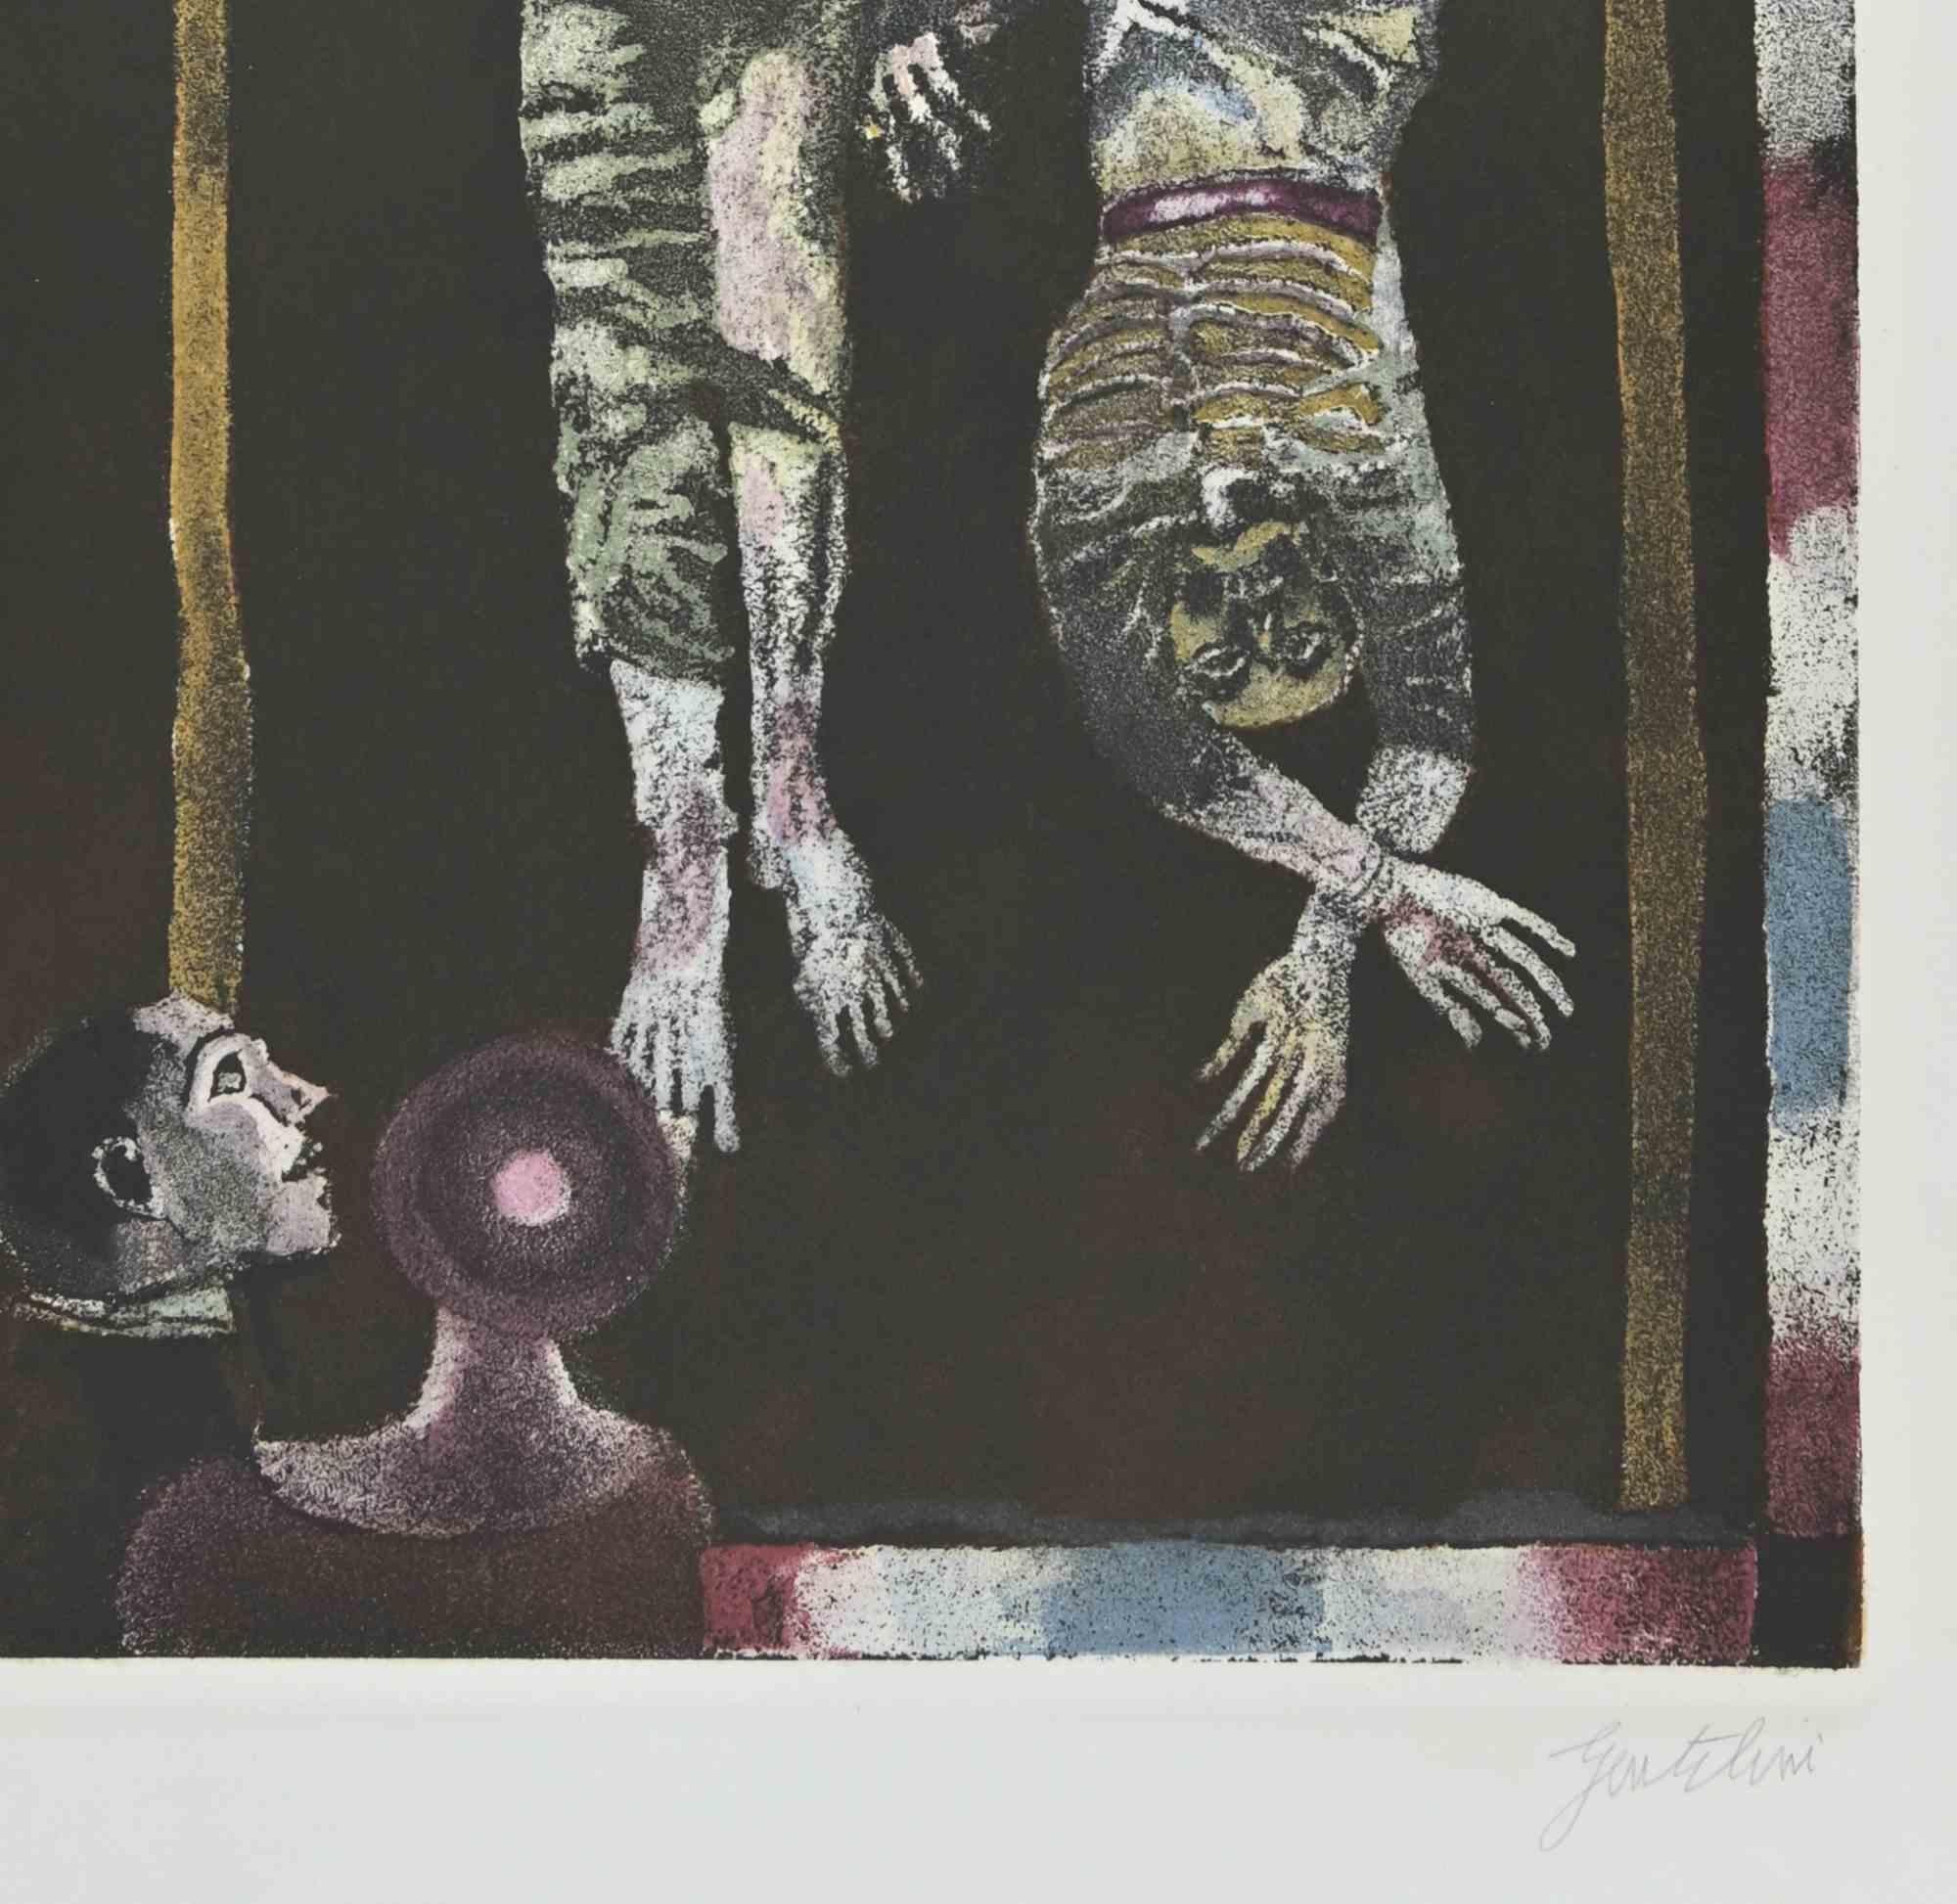  The Hanged Man - Etching and Aquatint by Franco Gentilini - 1970s For Sale 1